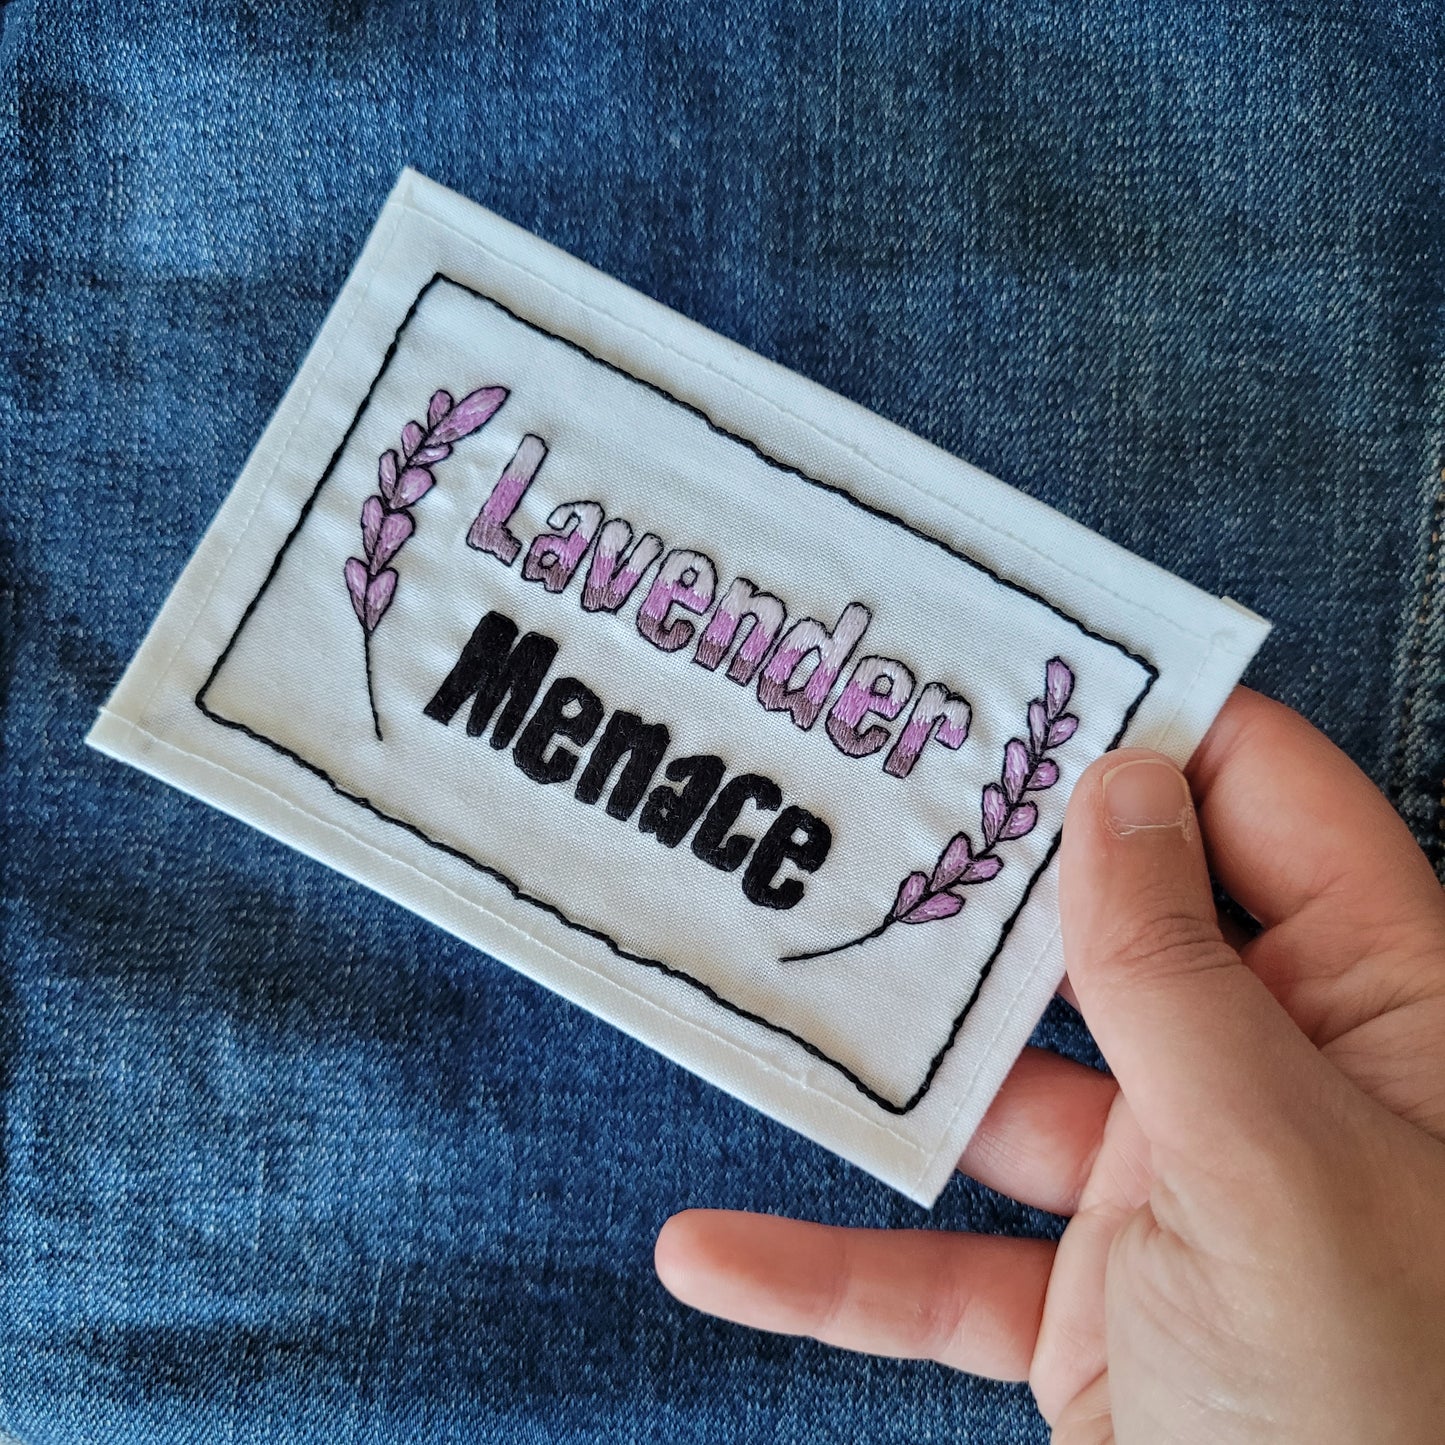 Lavender Menace | hand Embroidered Iron-on Patch